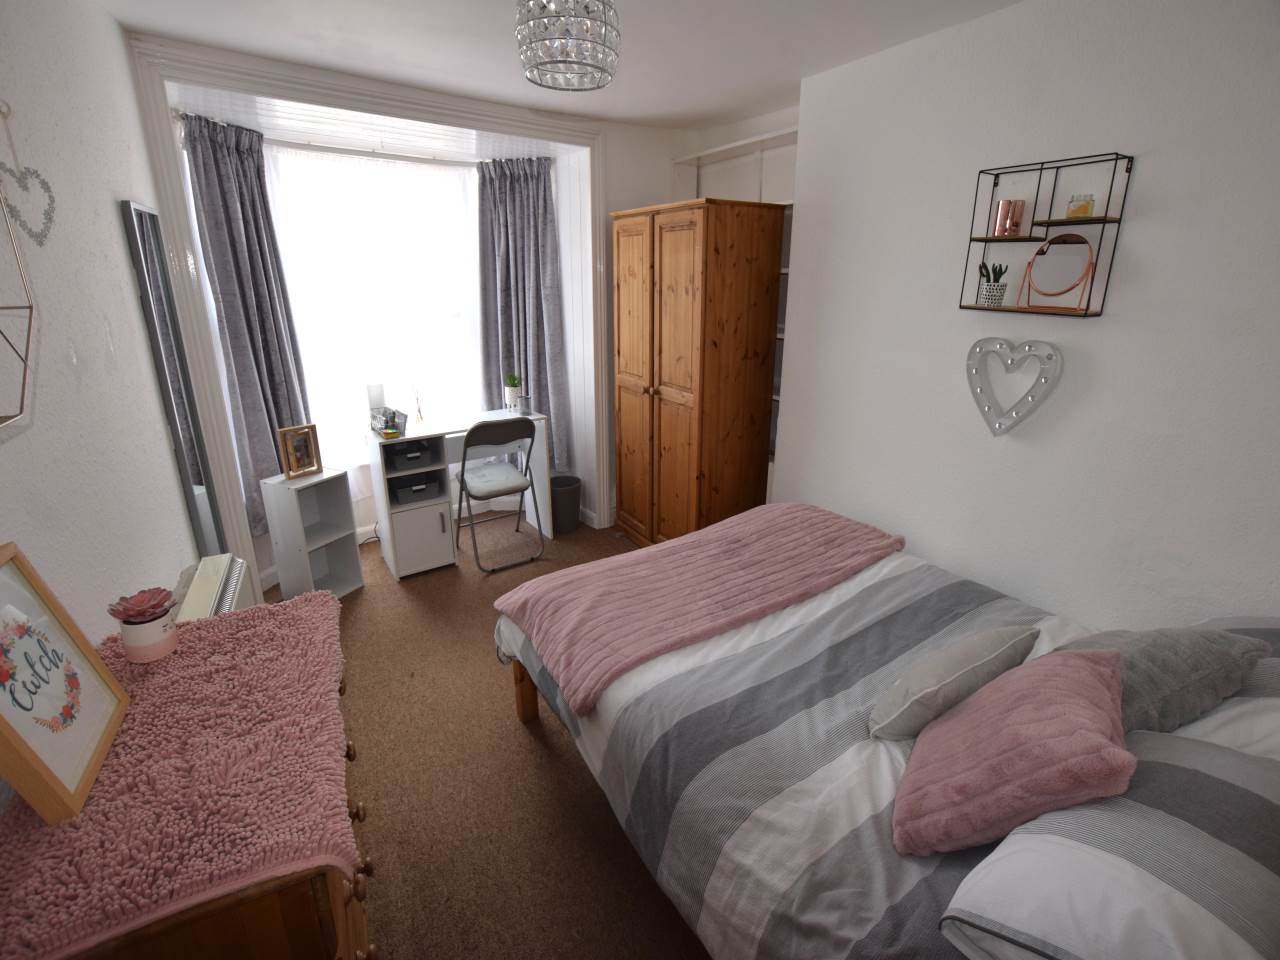 1 bed house / flat share to rent in Portland Street, Aberystwyth  - Property Image 6